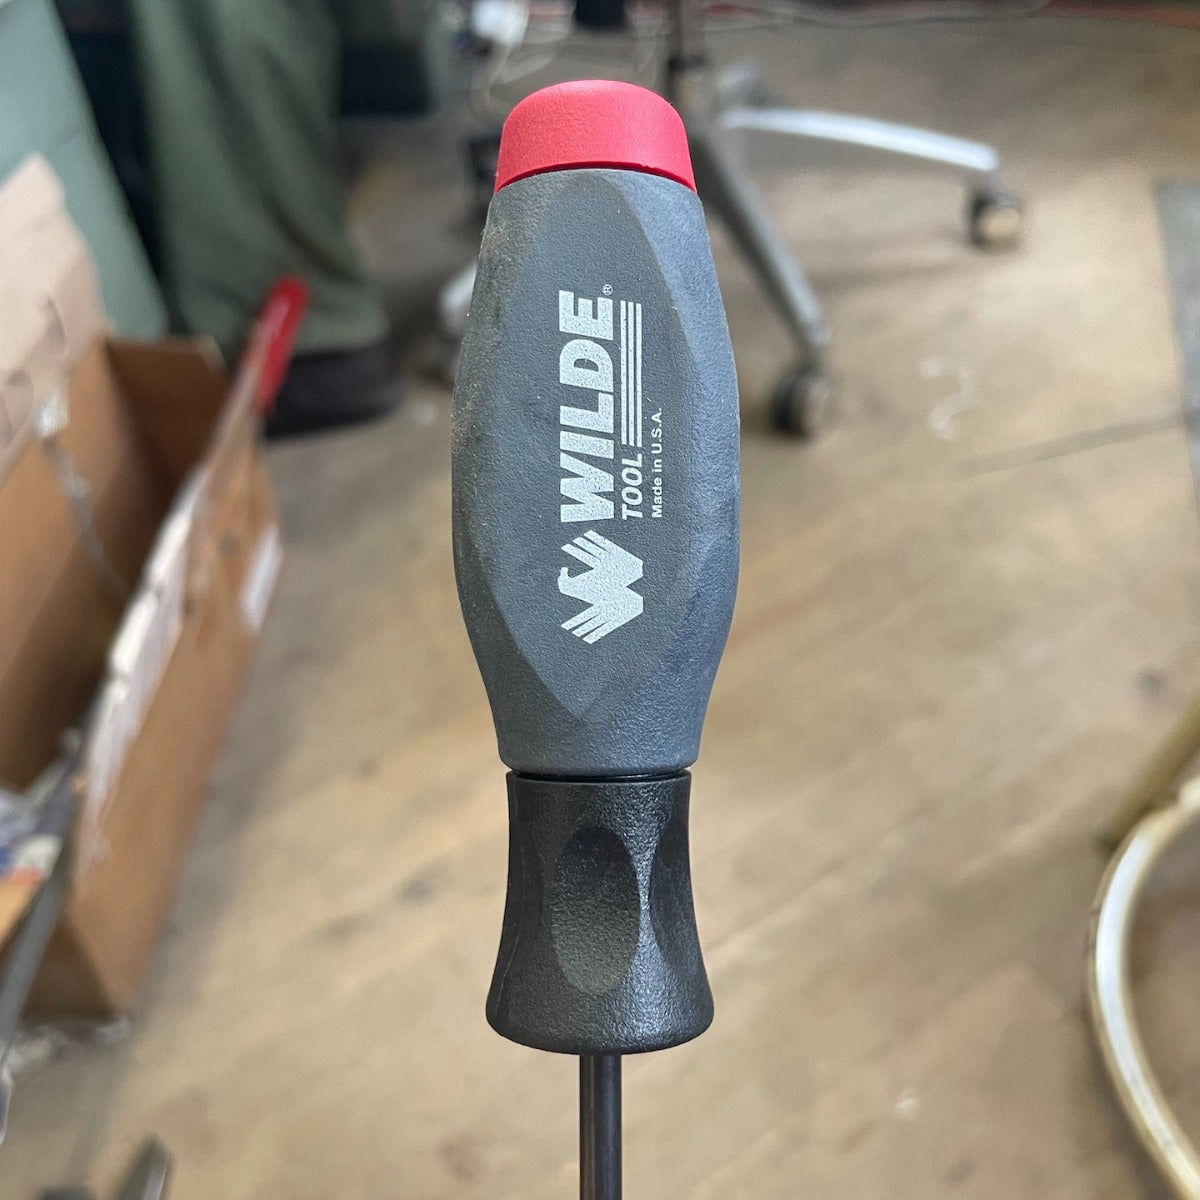 3/16" Wilde Slotted Screwdriver 4" Blade - 8" Overall